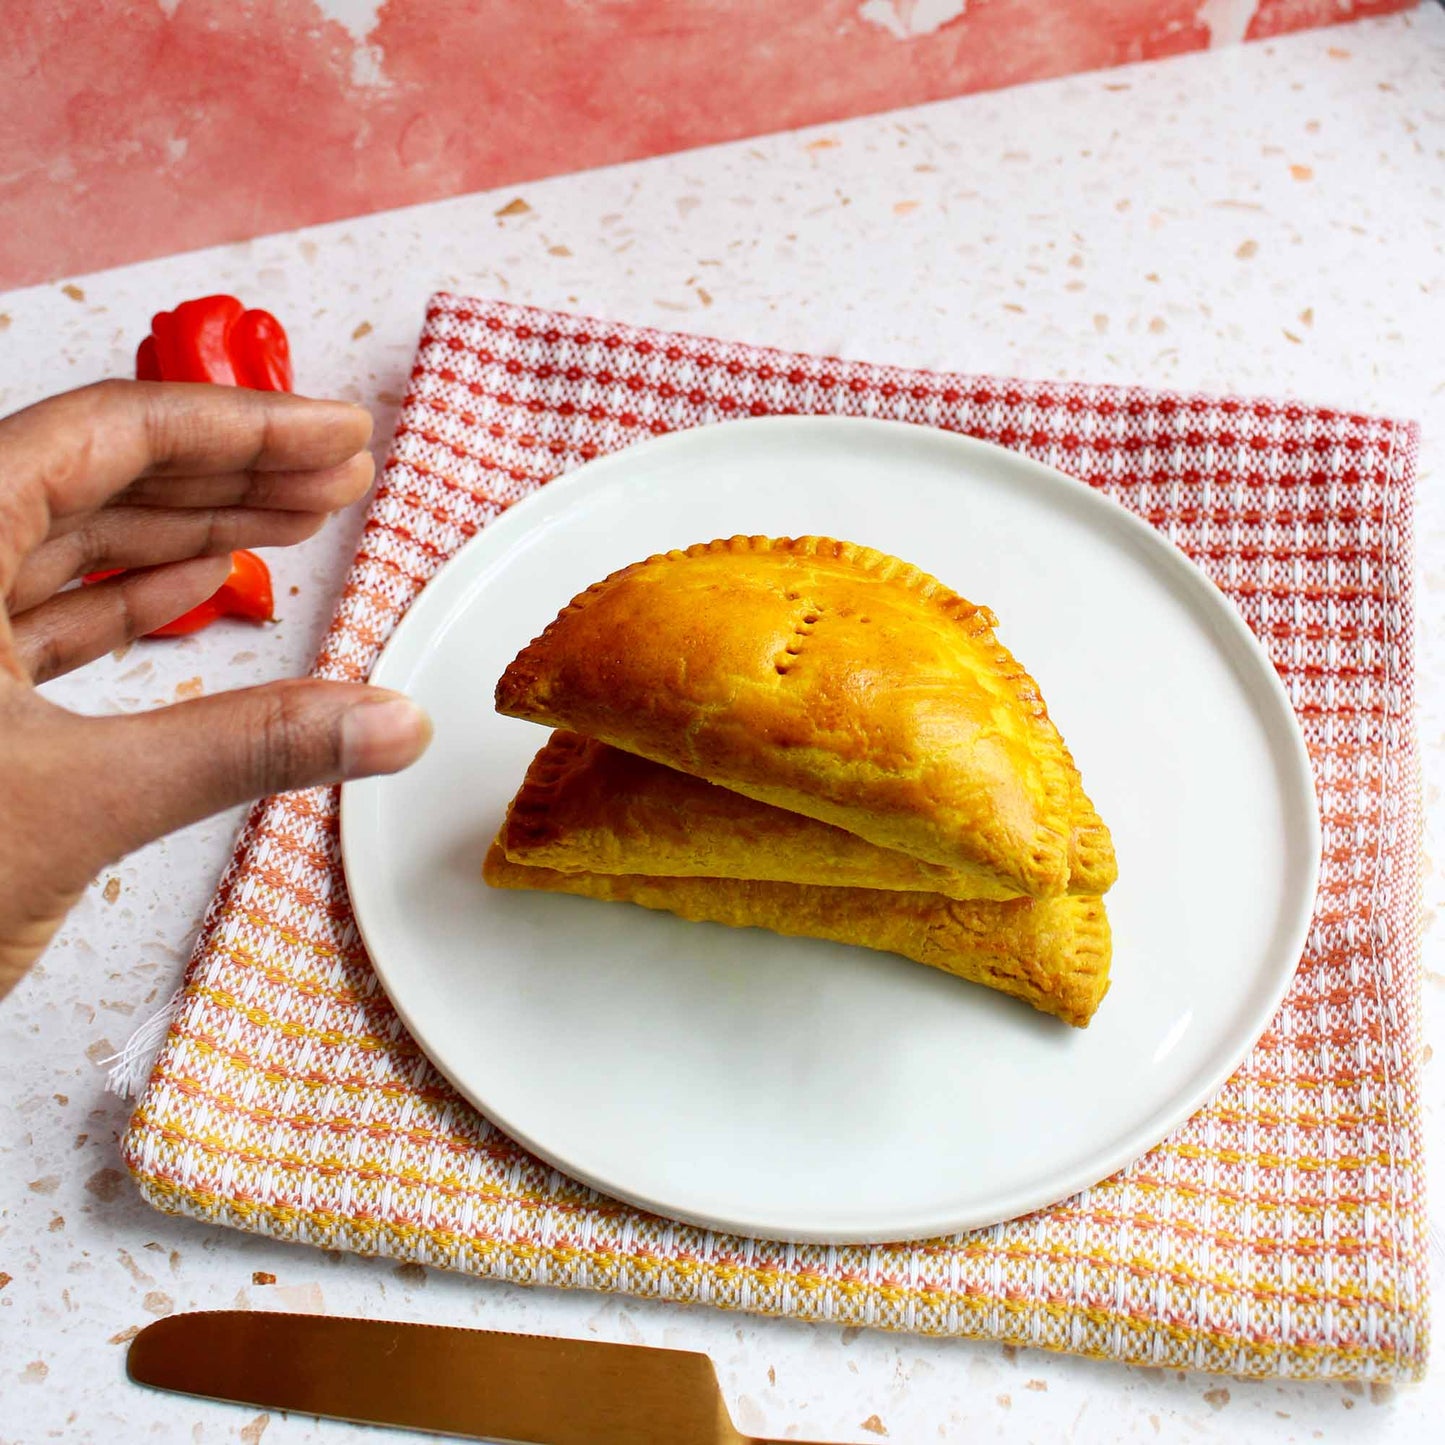 Image of a stack of Jamaican patties on a white plate and a hand reaching to take one